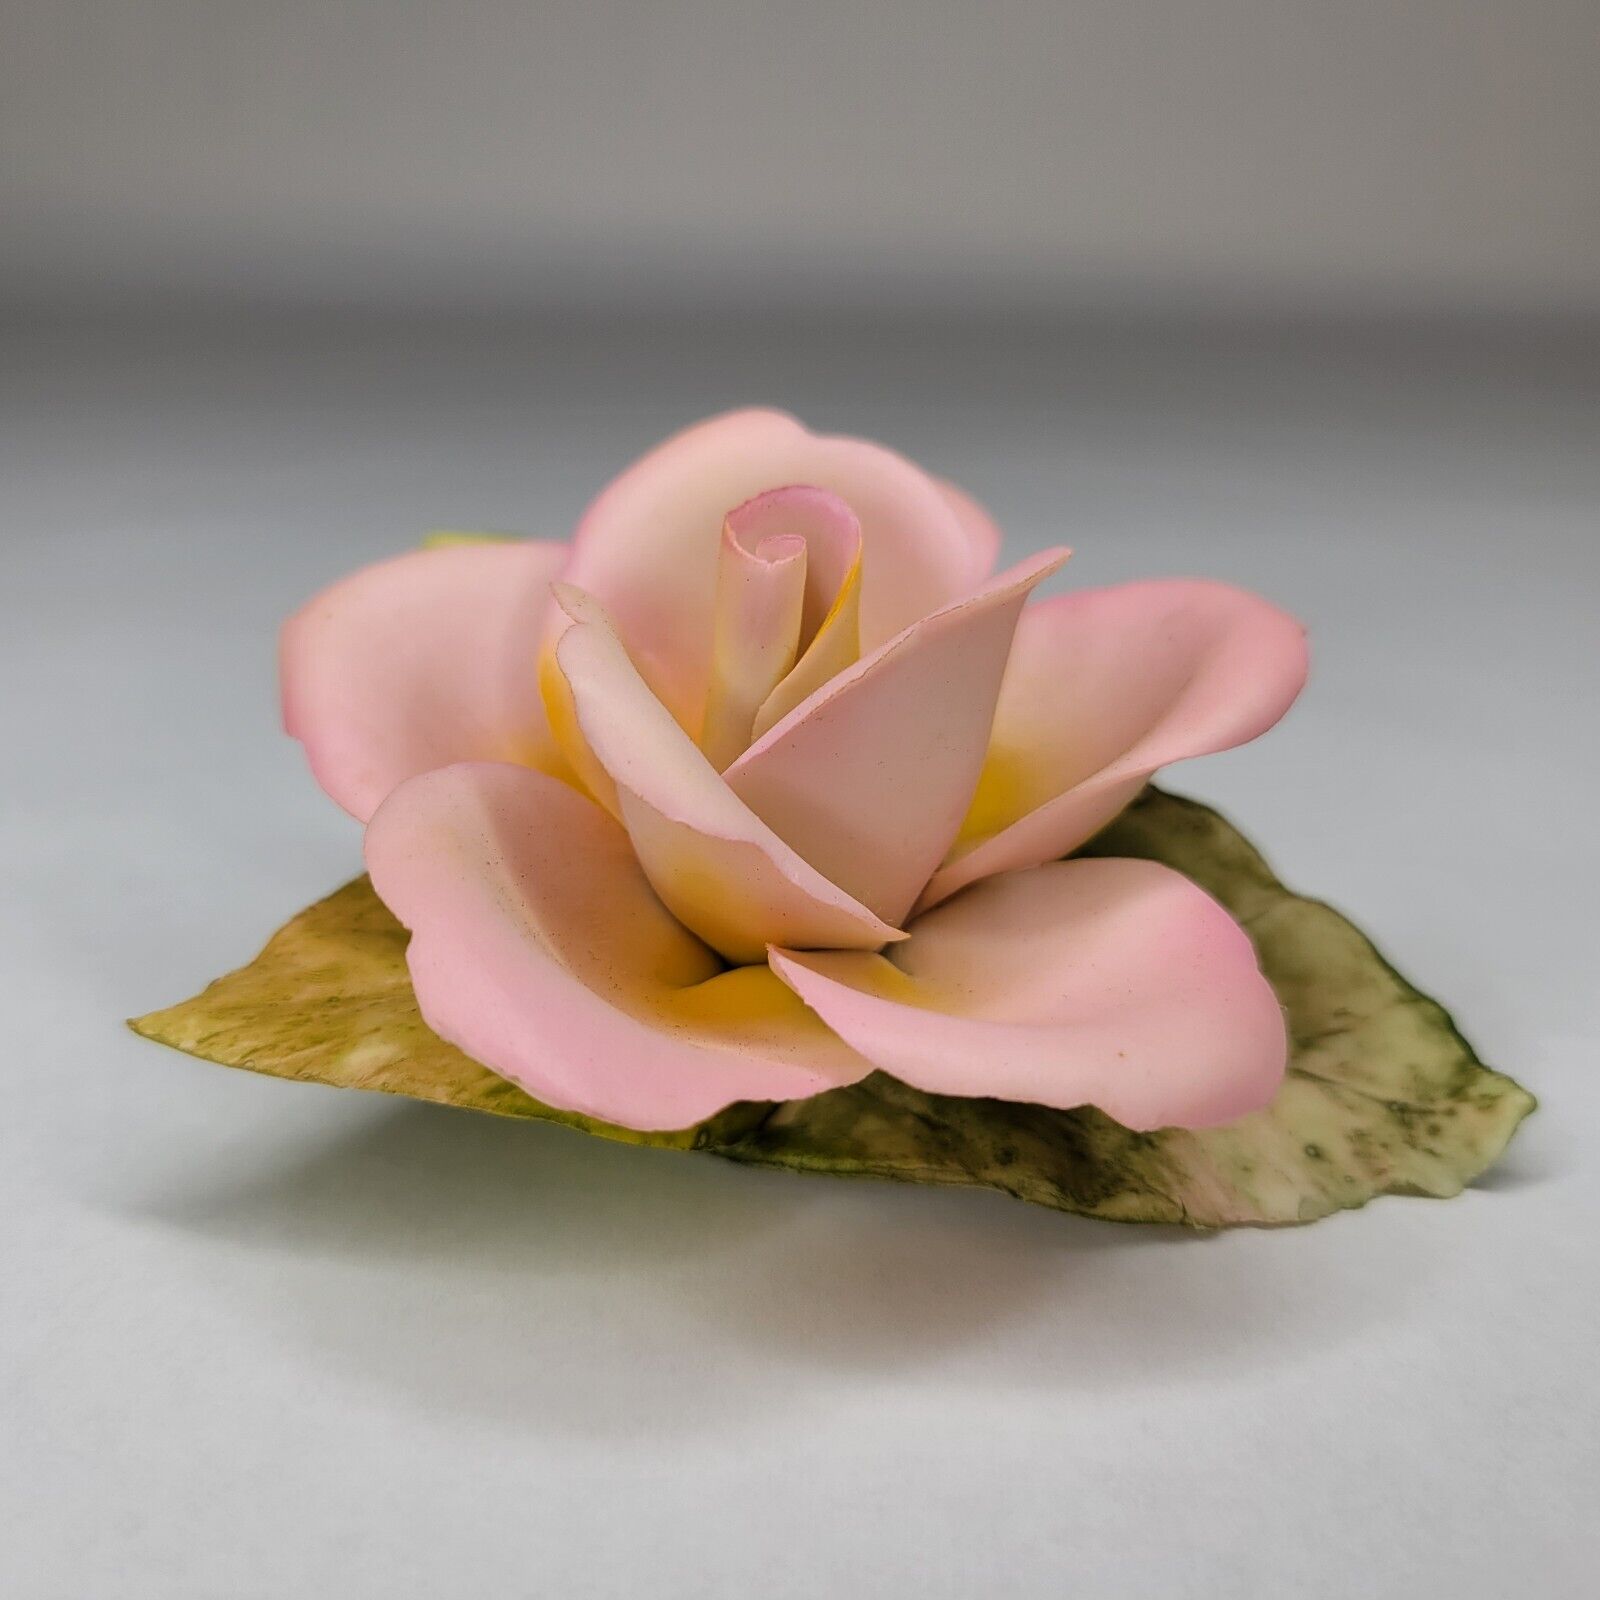 Vintage Napolean Capodimonte Rose Flower Porcelain Pink Sculpture Made in Italy